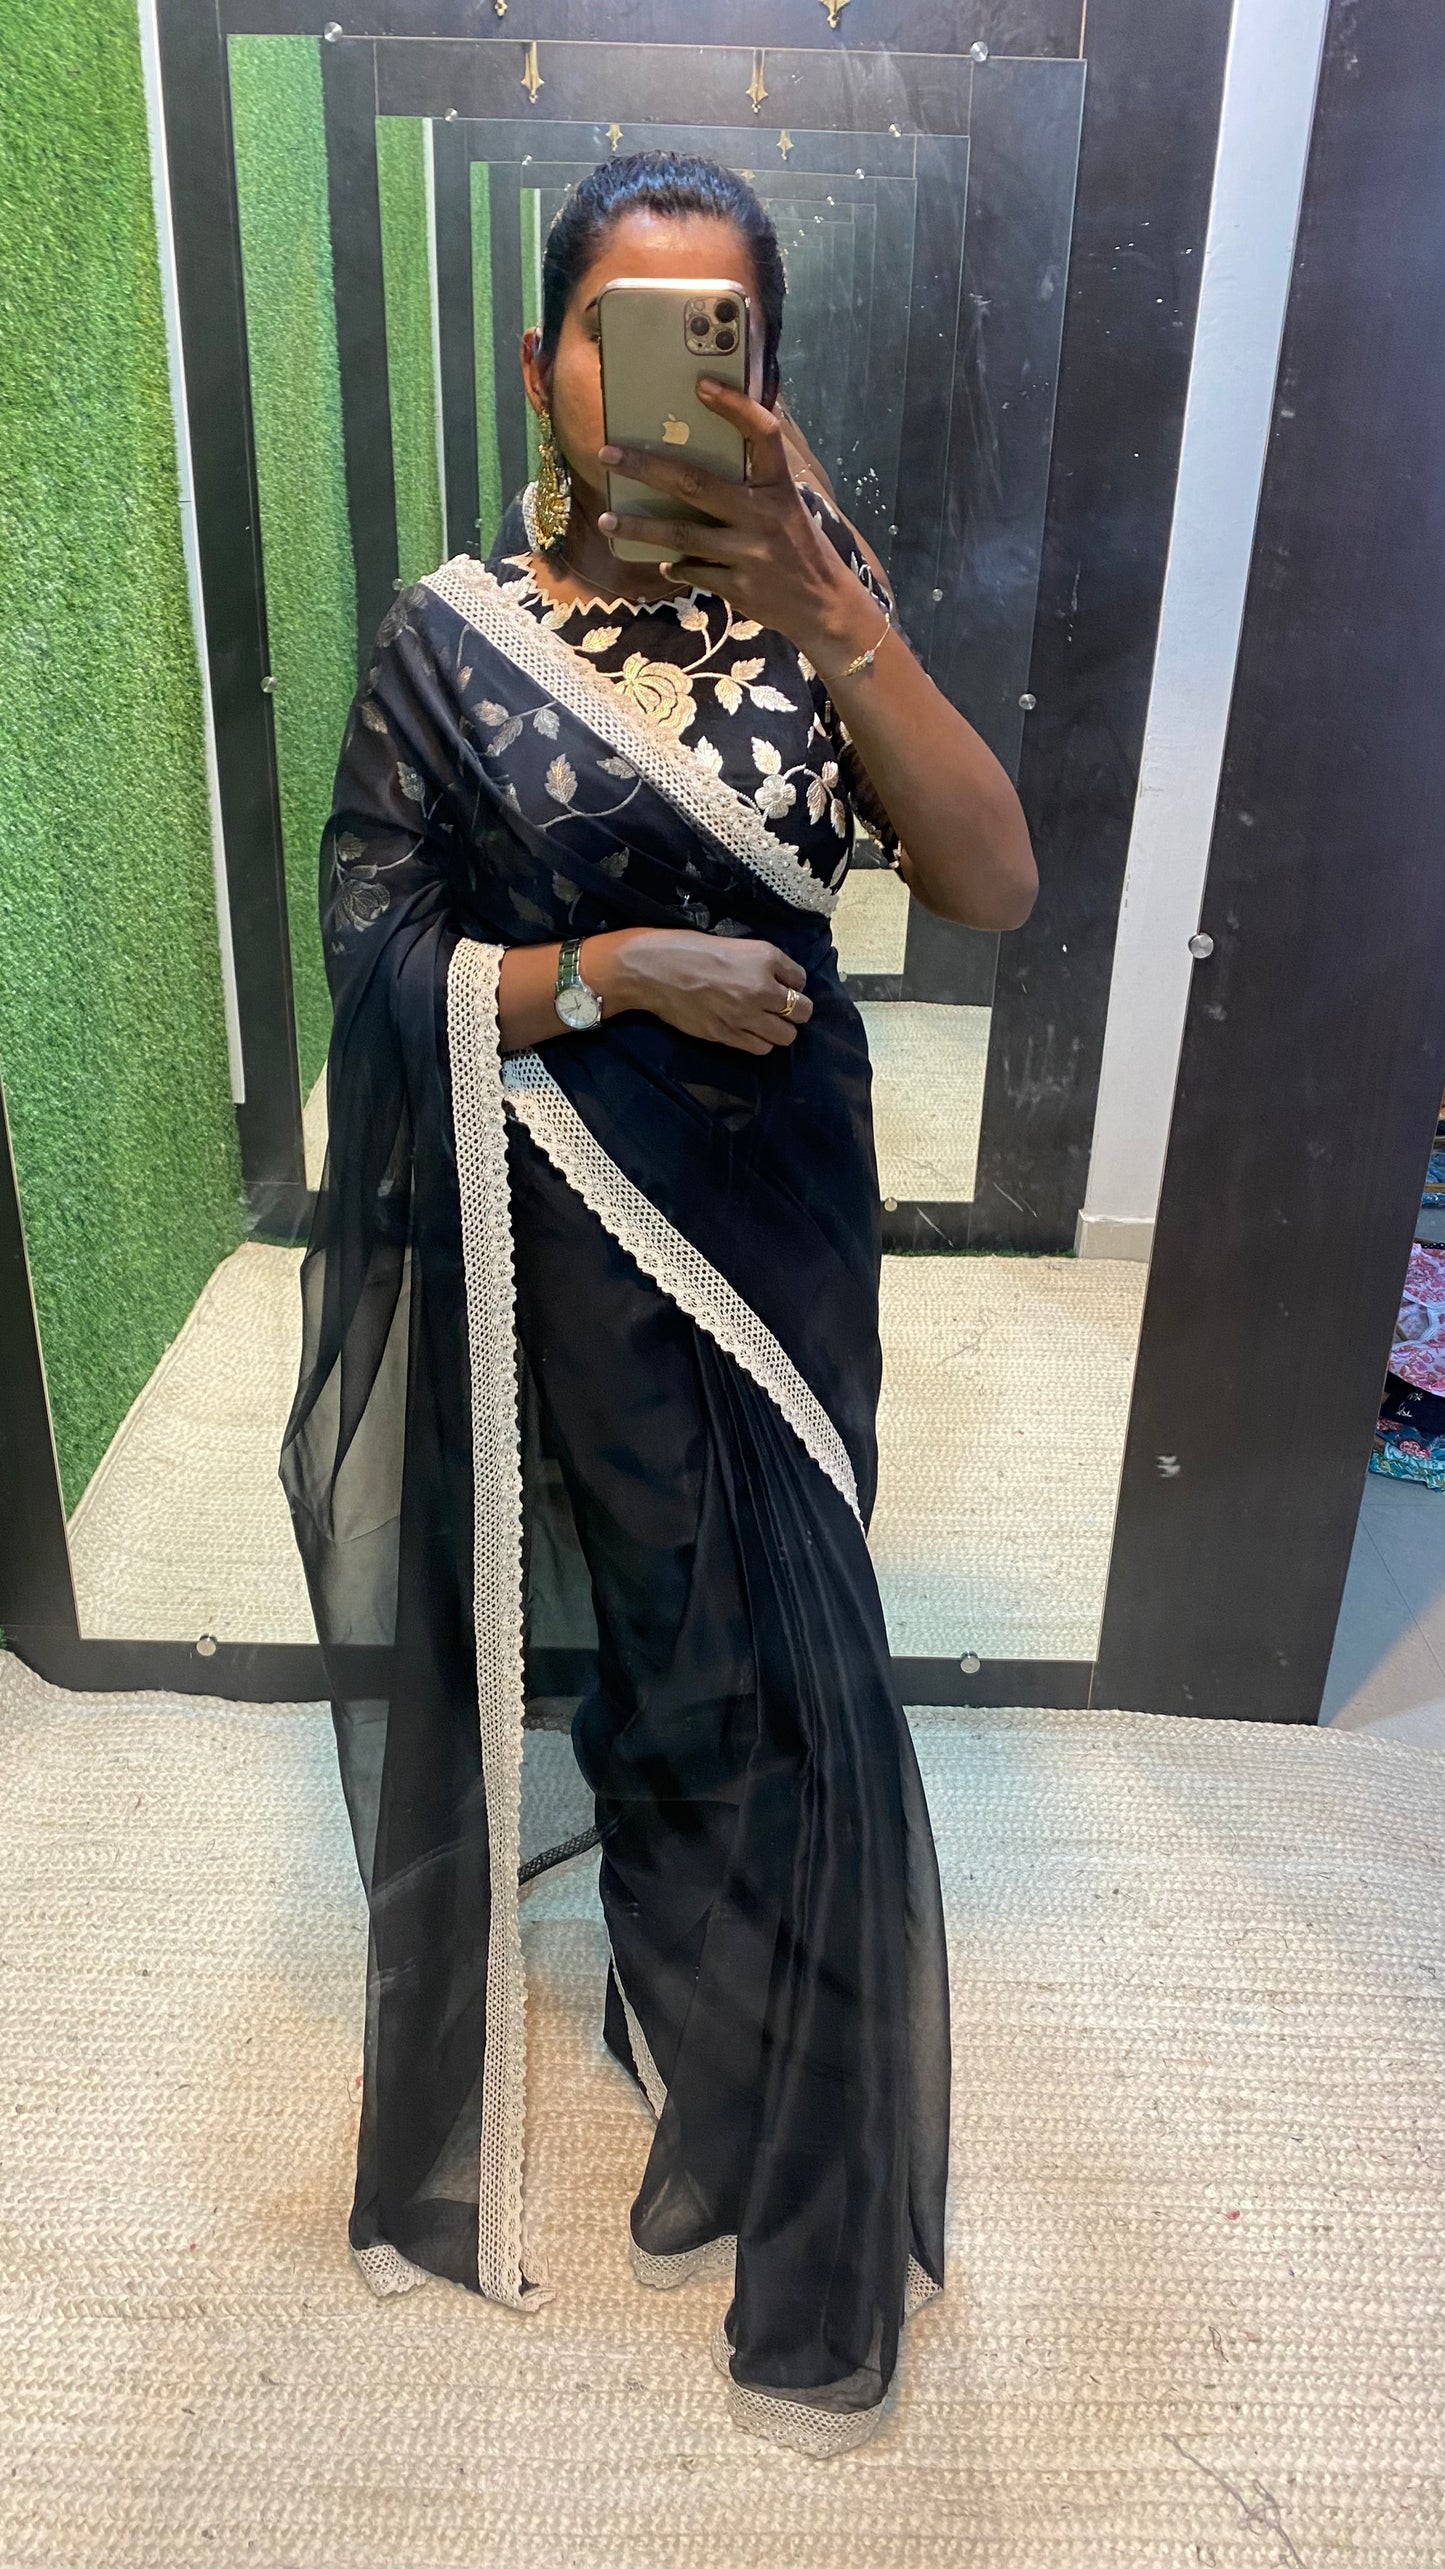 Black soft organza saree with netted embroidery blouse